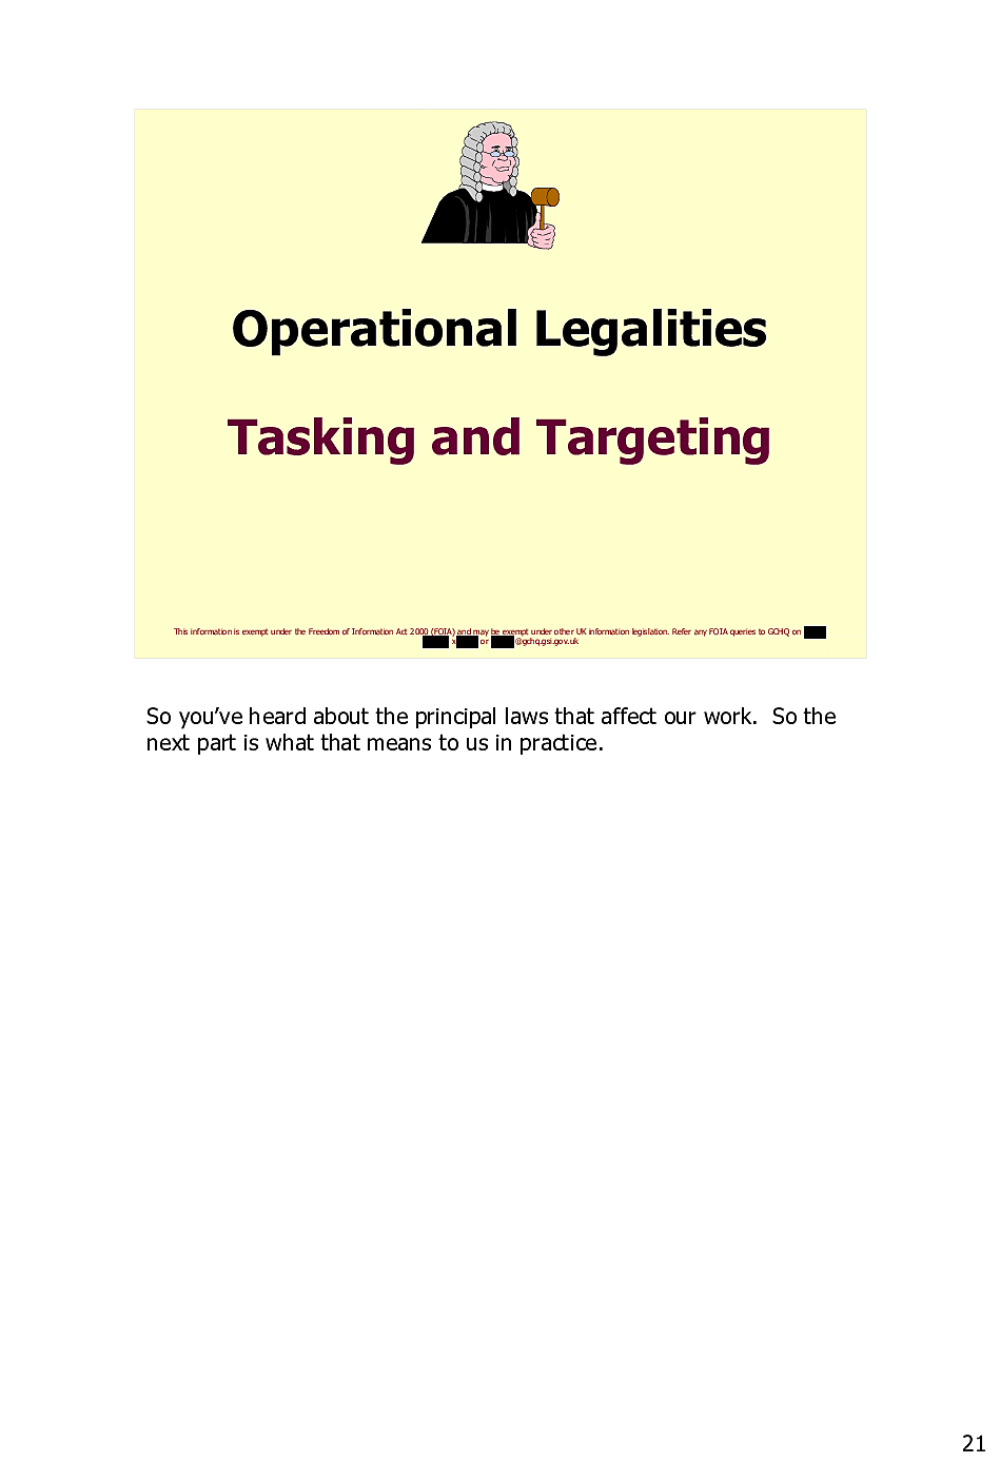 Page 99 from Operational Legalities – GCHQ Powerpoint Presentation